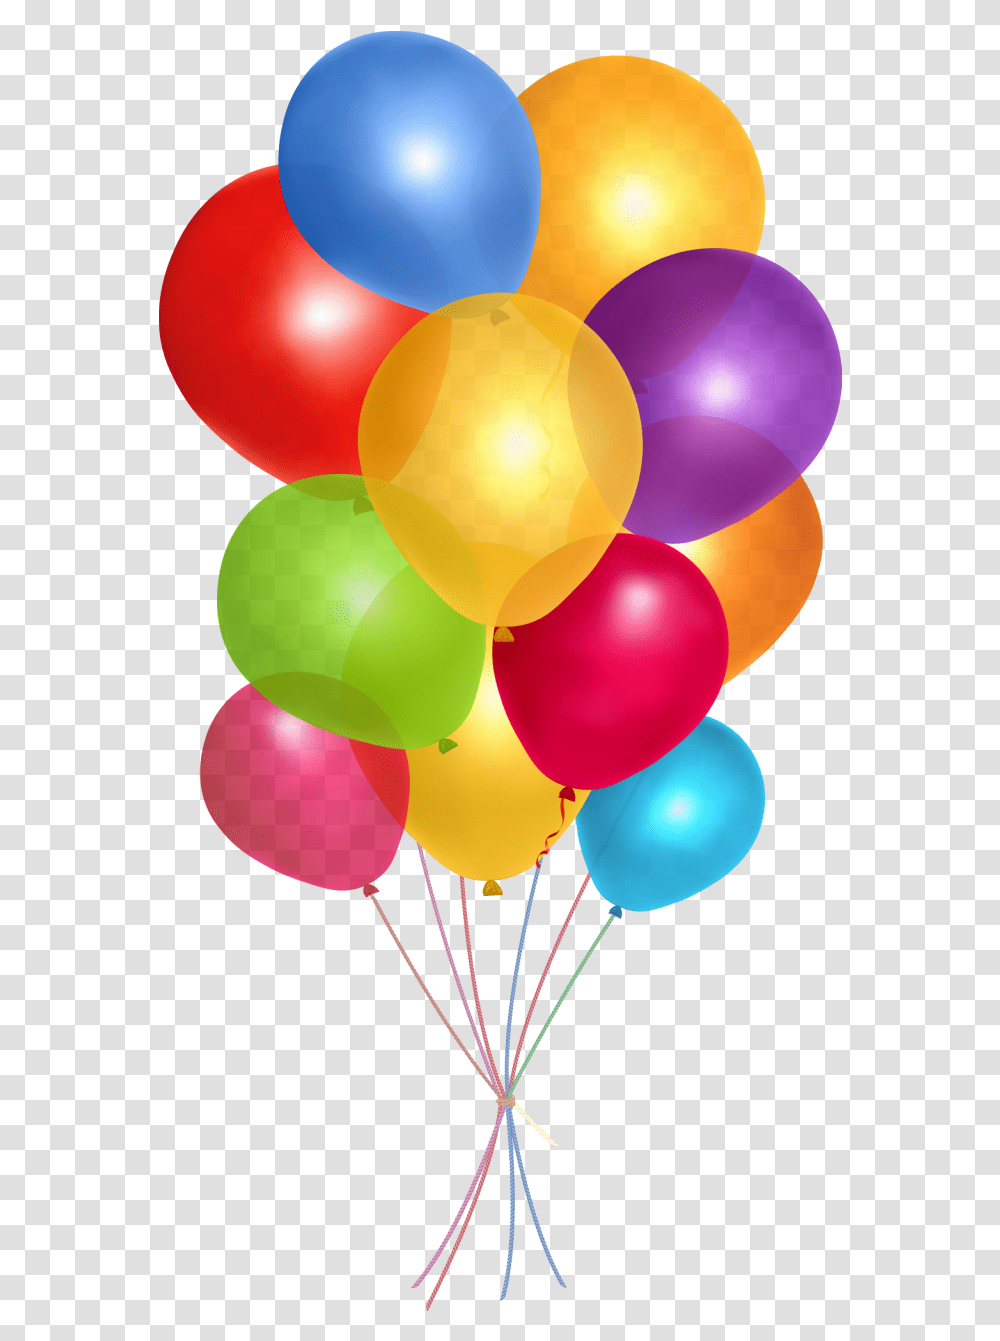 Balloon Balloons File Hd Clipart Background Balloons Clipart Transparent Png